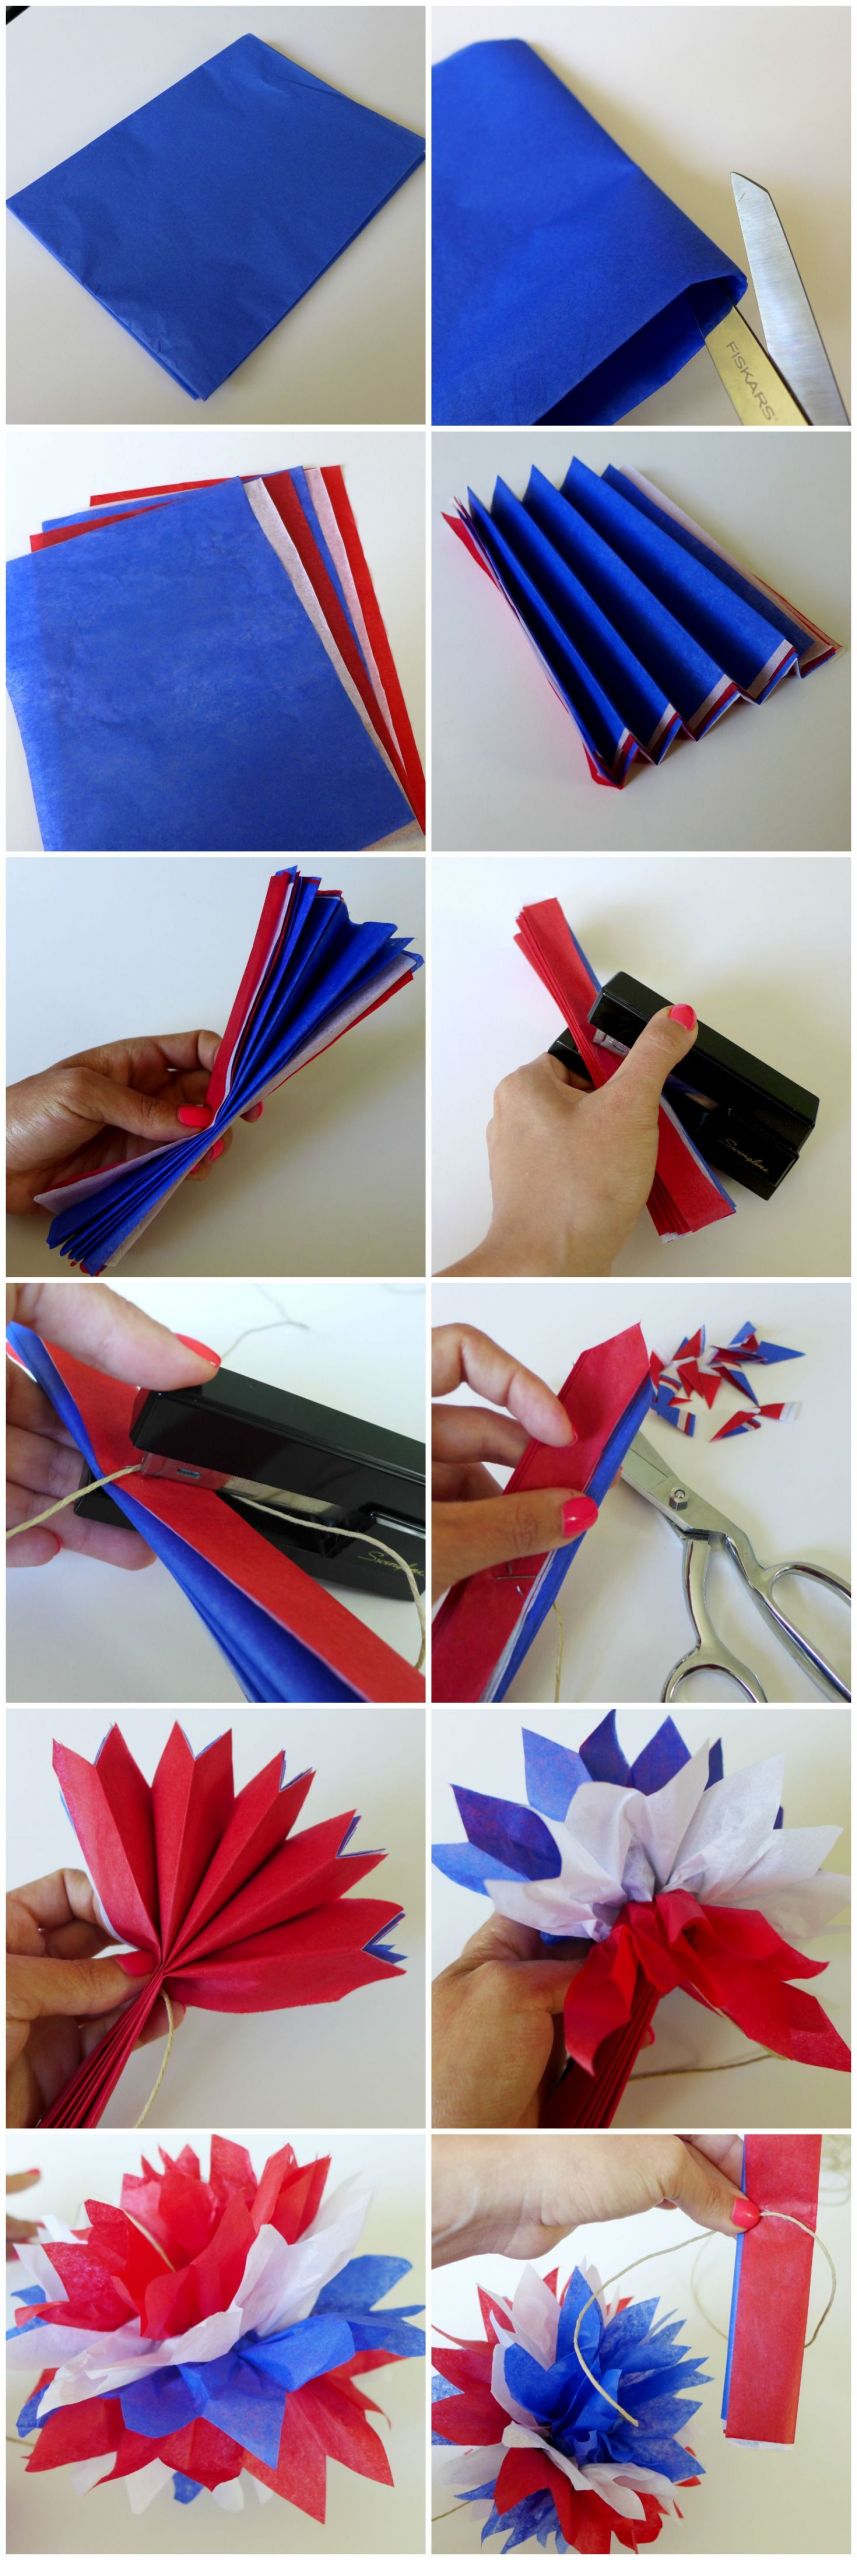 Diy 4th Of July Crafts
 Red White and Blue Pom Garland Memorial Day 4th of